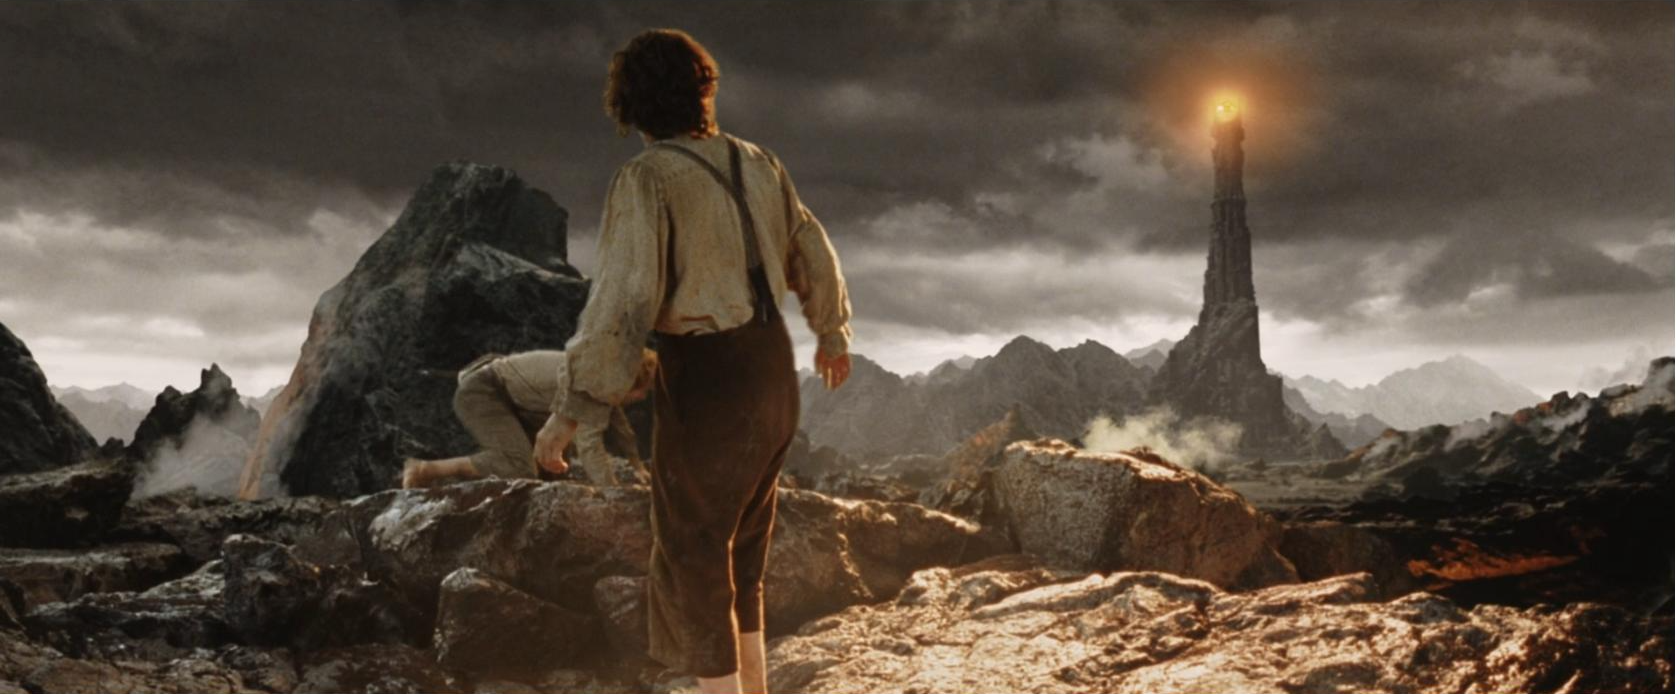 frodo-at-mordor-blank-template-imgflip